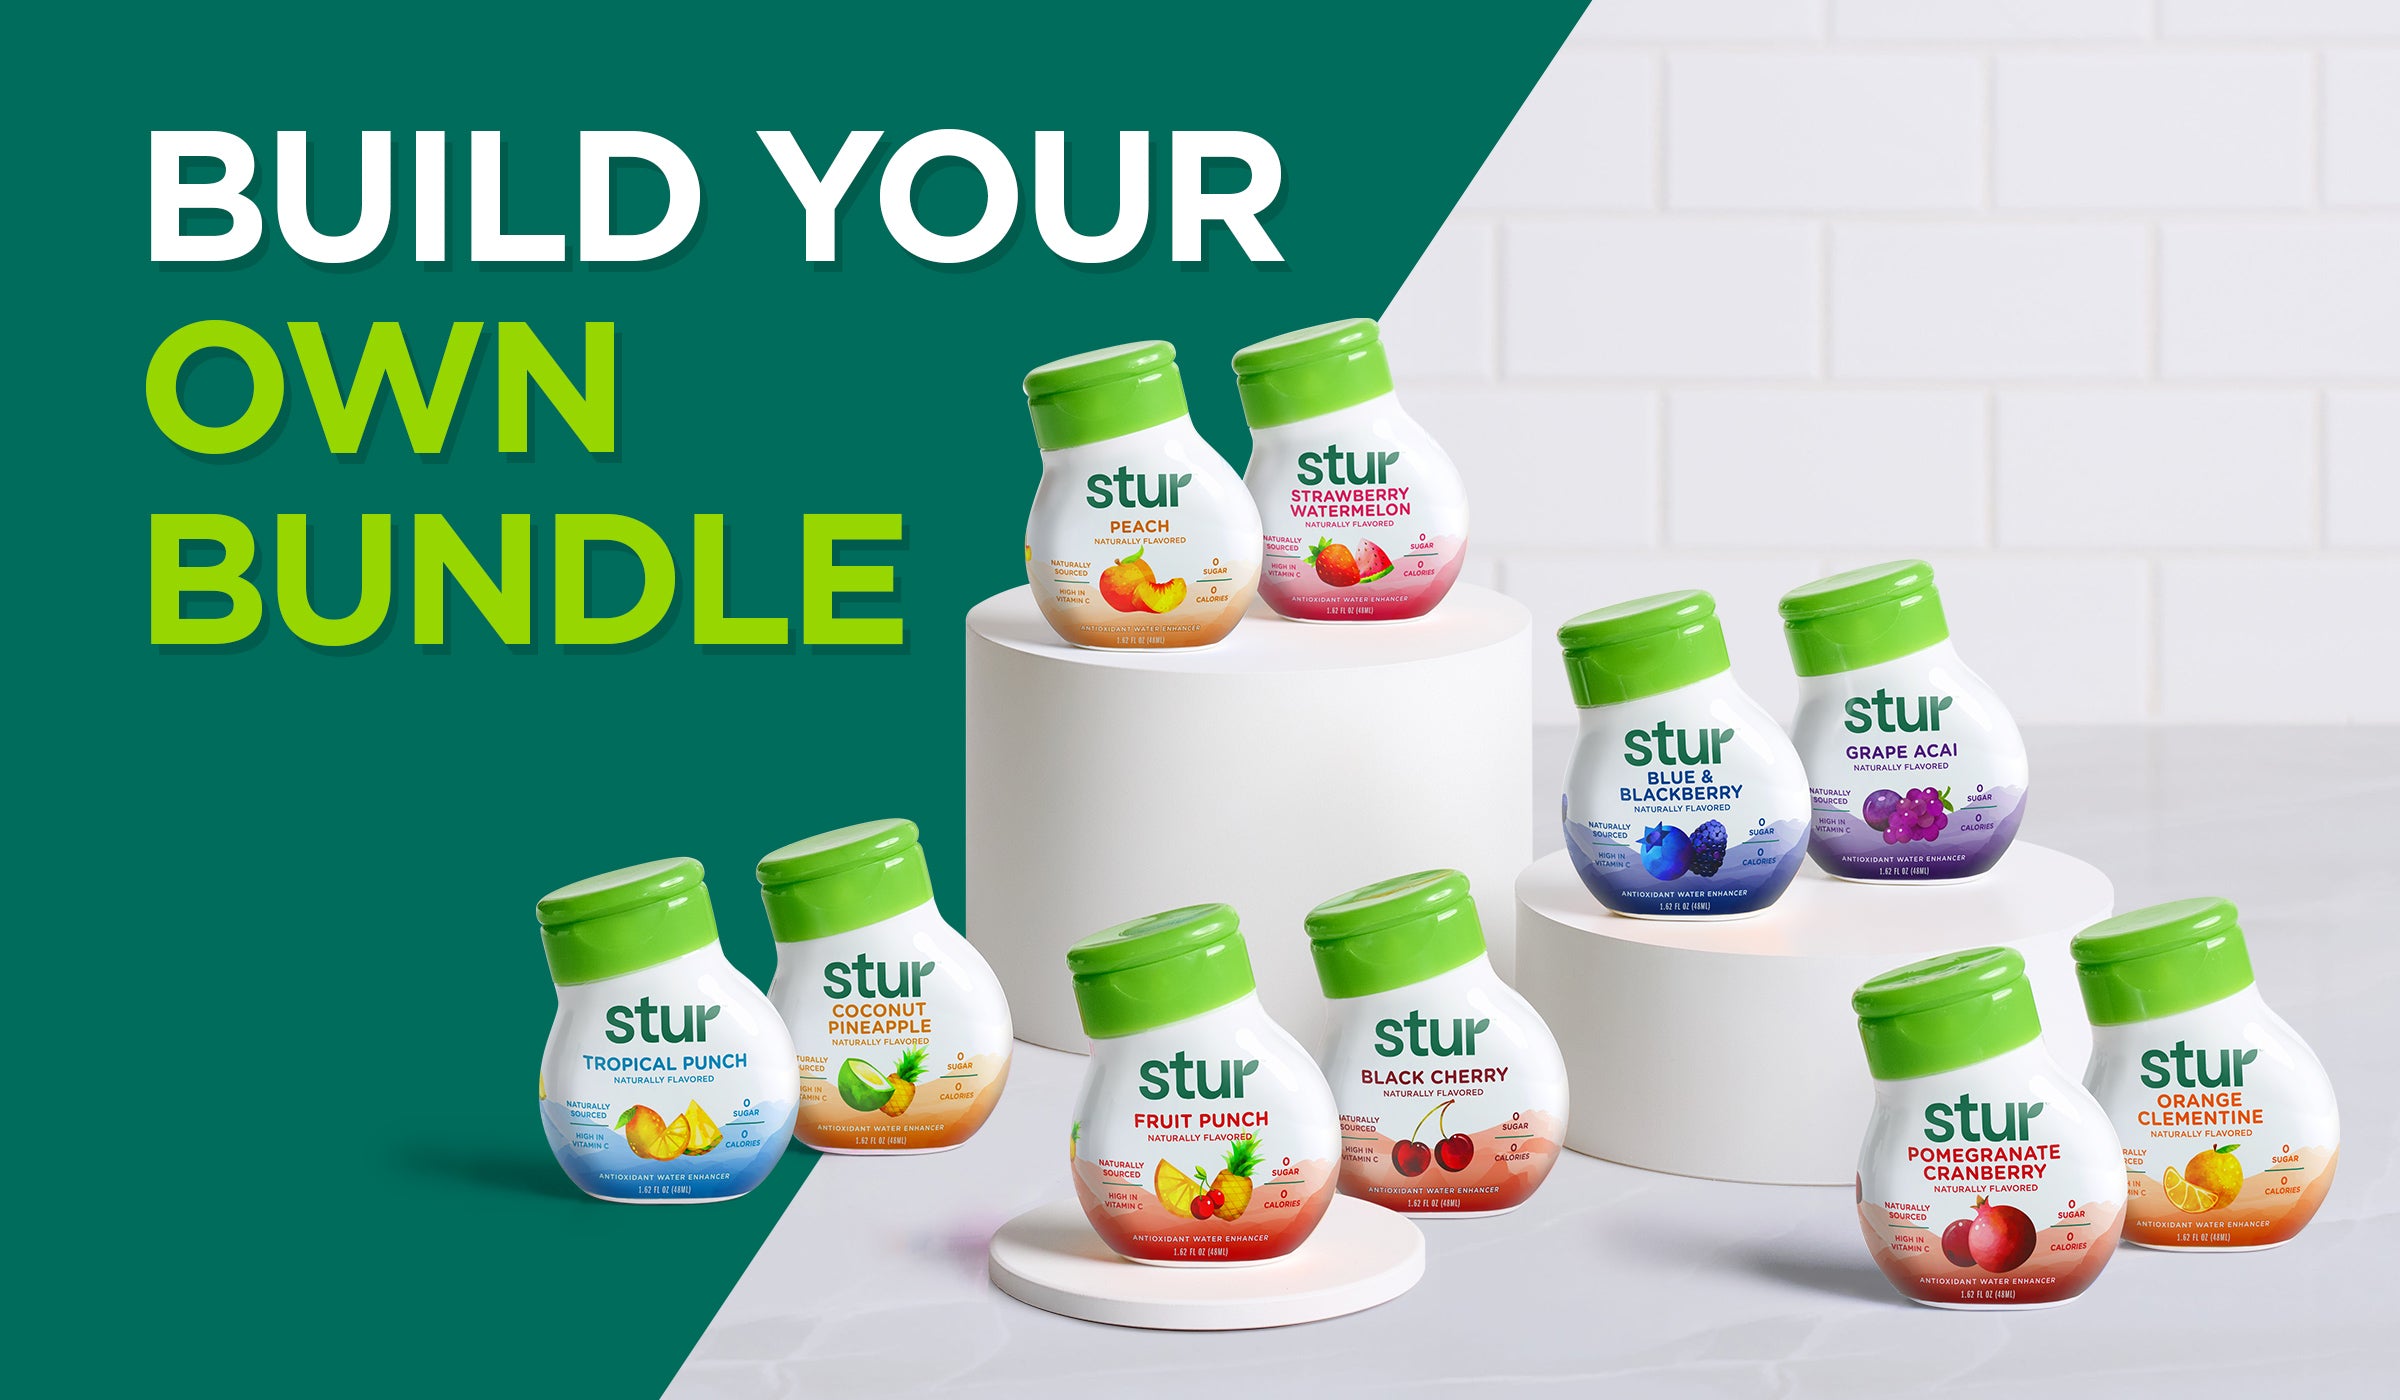 Compass Foods - Introducing Stur liquid water enhancers! 😍 ⠀ Made with all  natural ingredients Stur liquid drink mixes have zero sugar, zero calories,  and are high in antioxidant vitamin C! ⠀